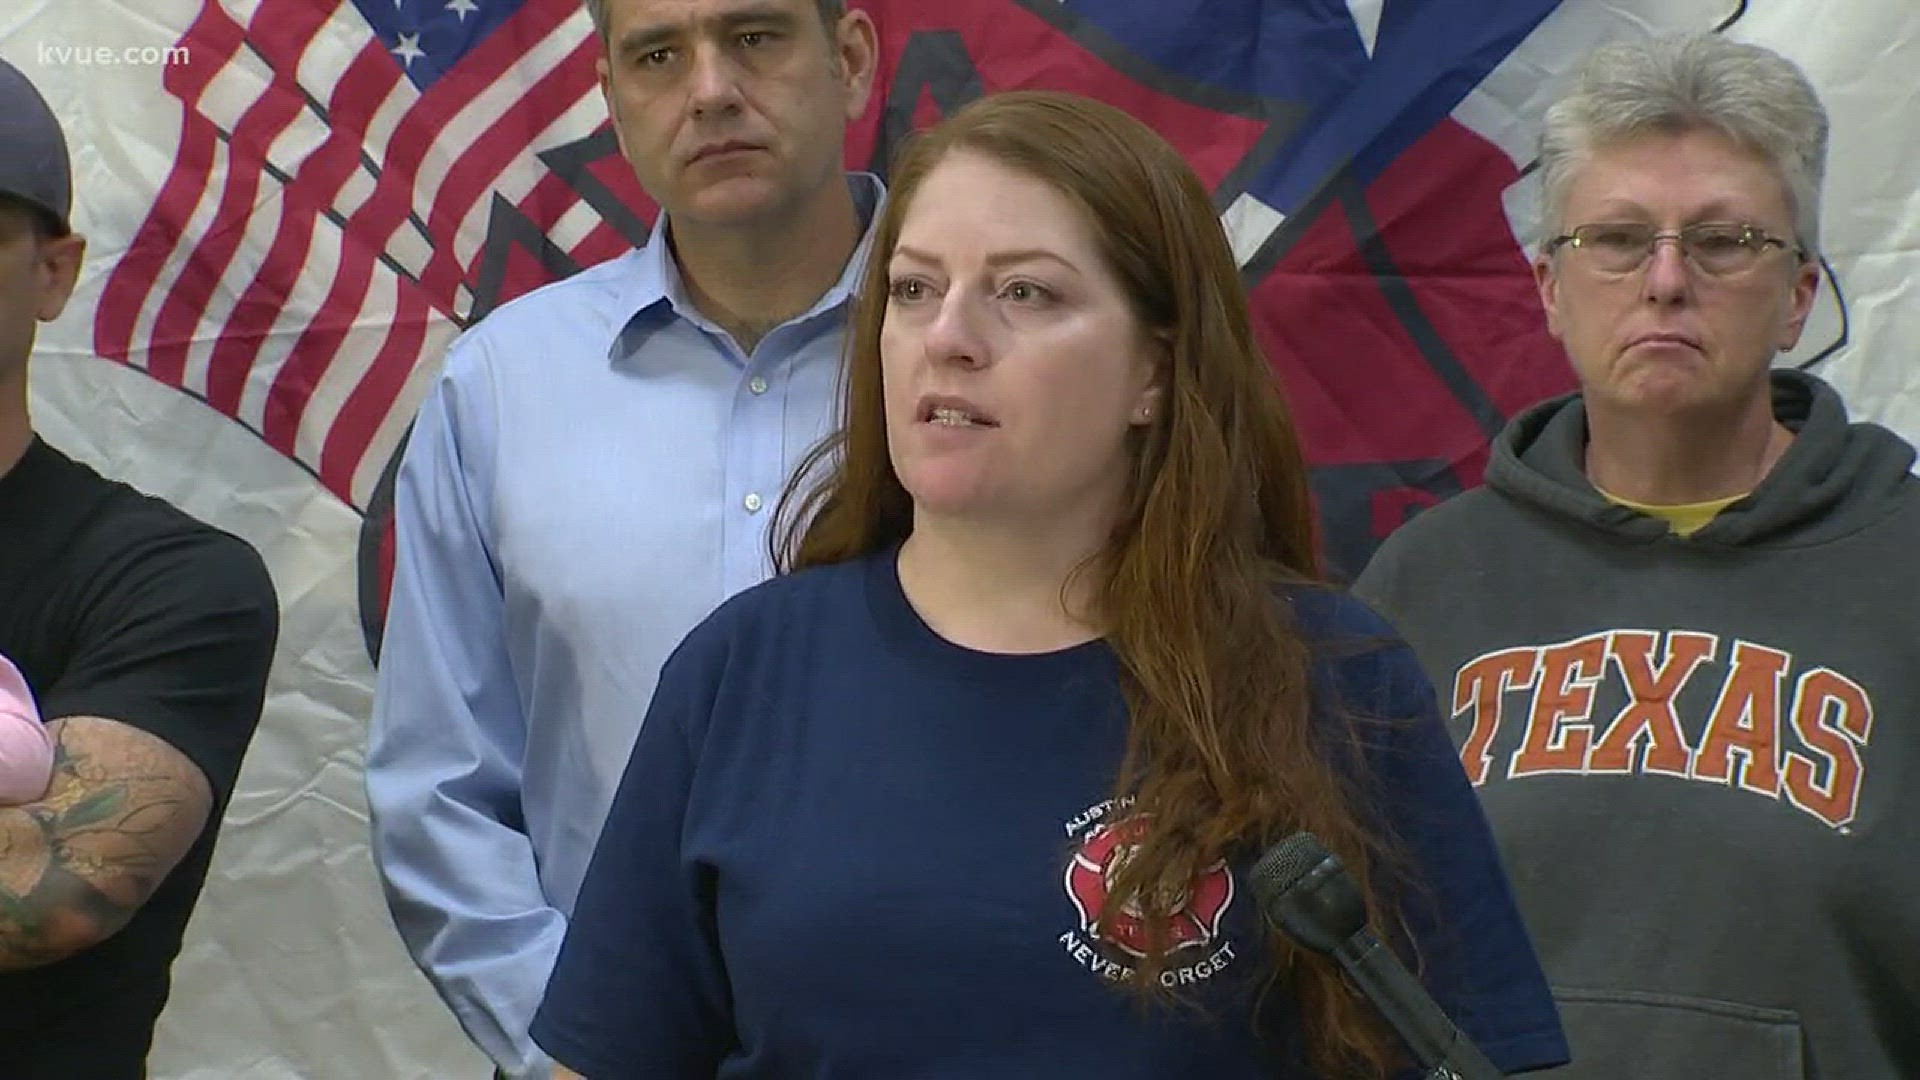 The press conference came after allegations against a former Austin fire lieutenant.